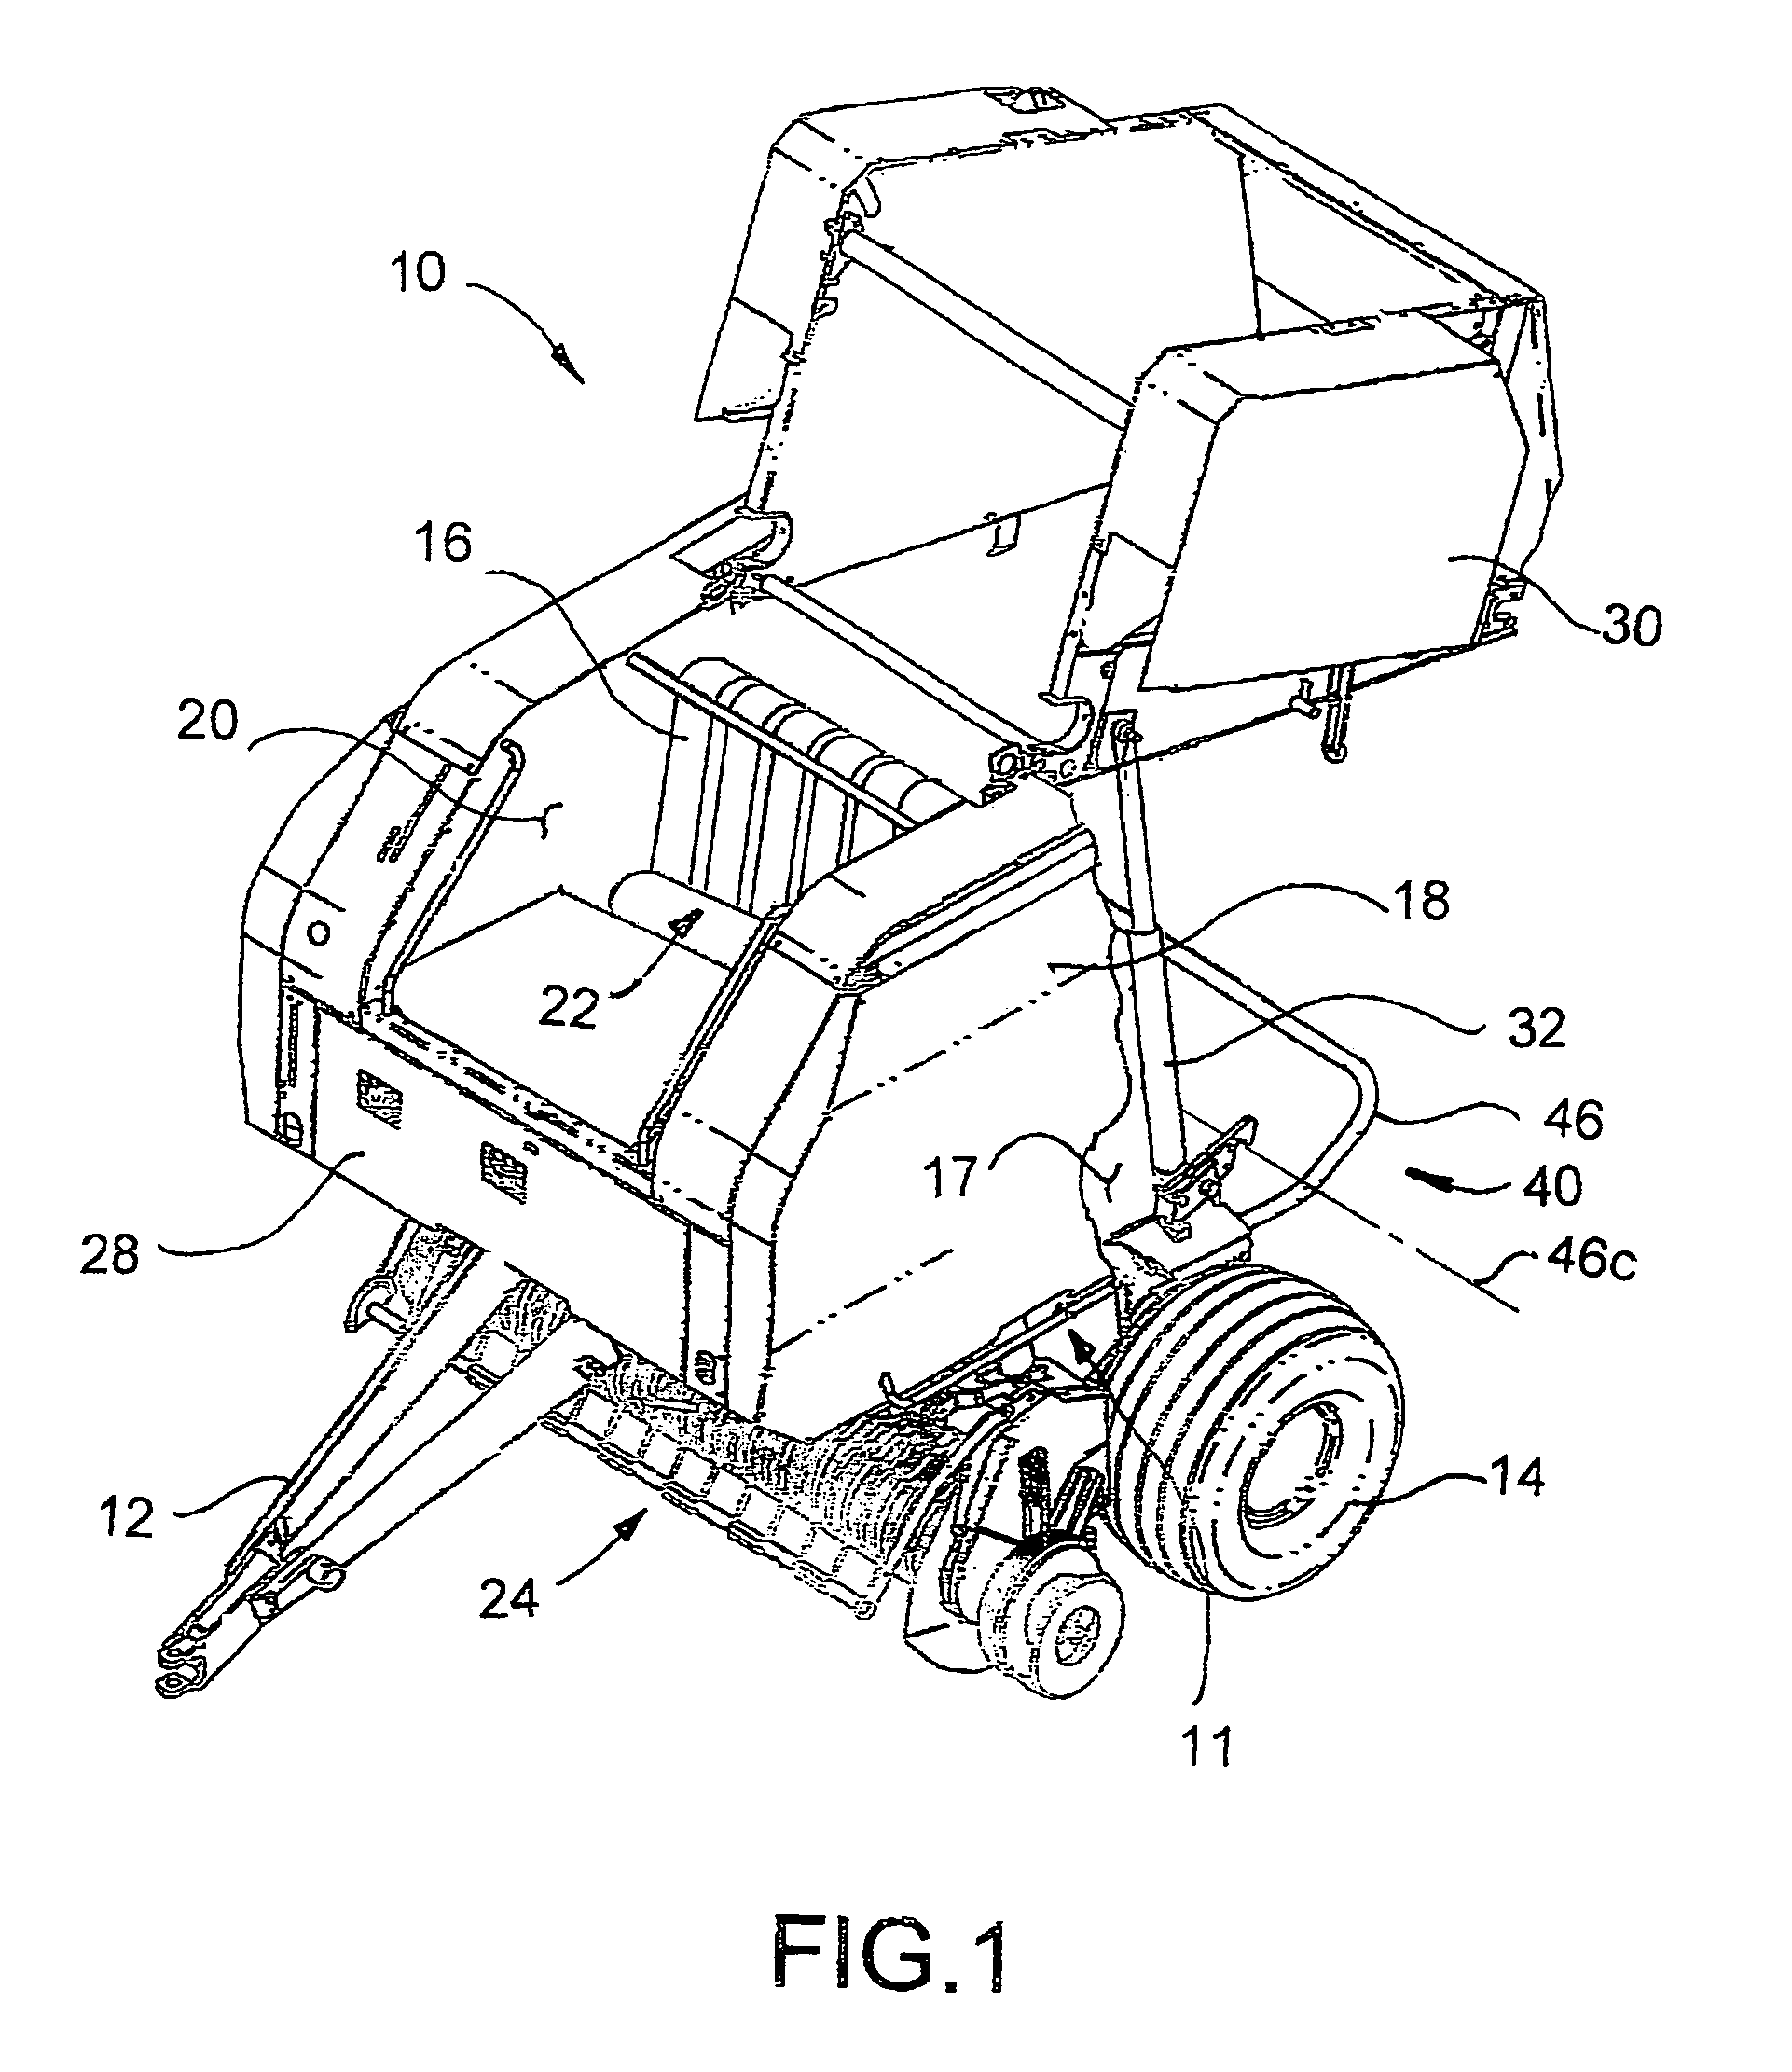 Hydraulic bale kicker with optional weighing device